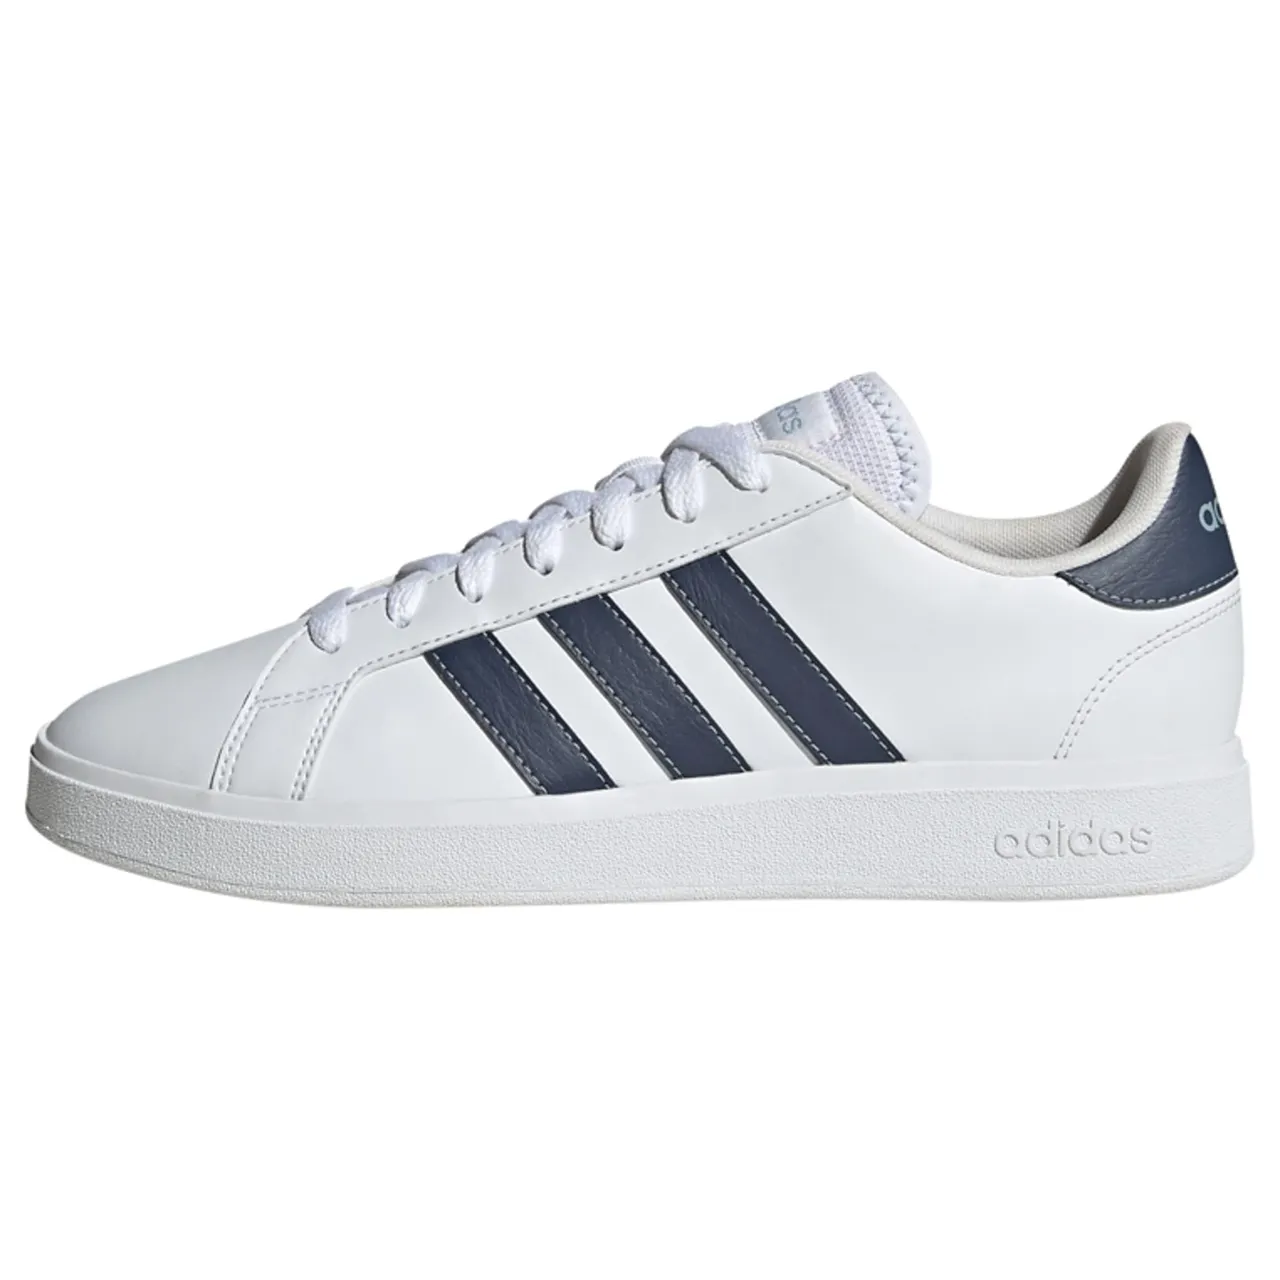 adidas Men's Grand Court Base 2.0 Sneakers